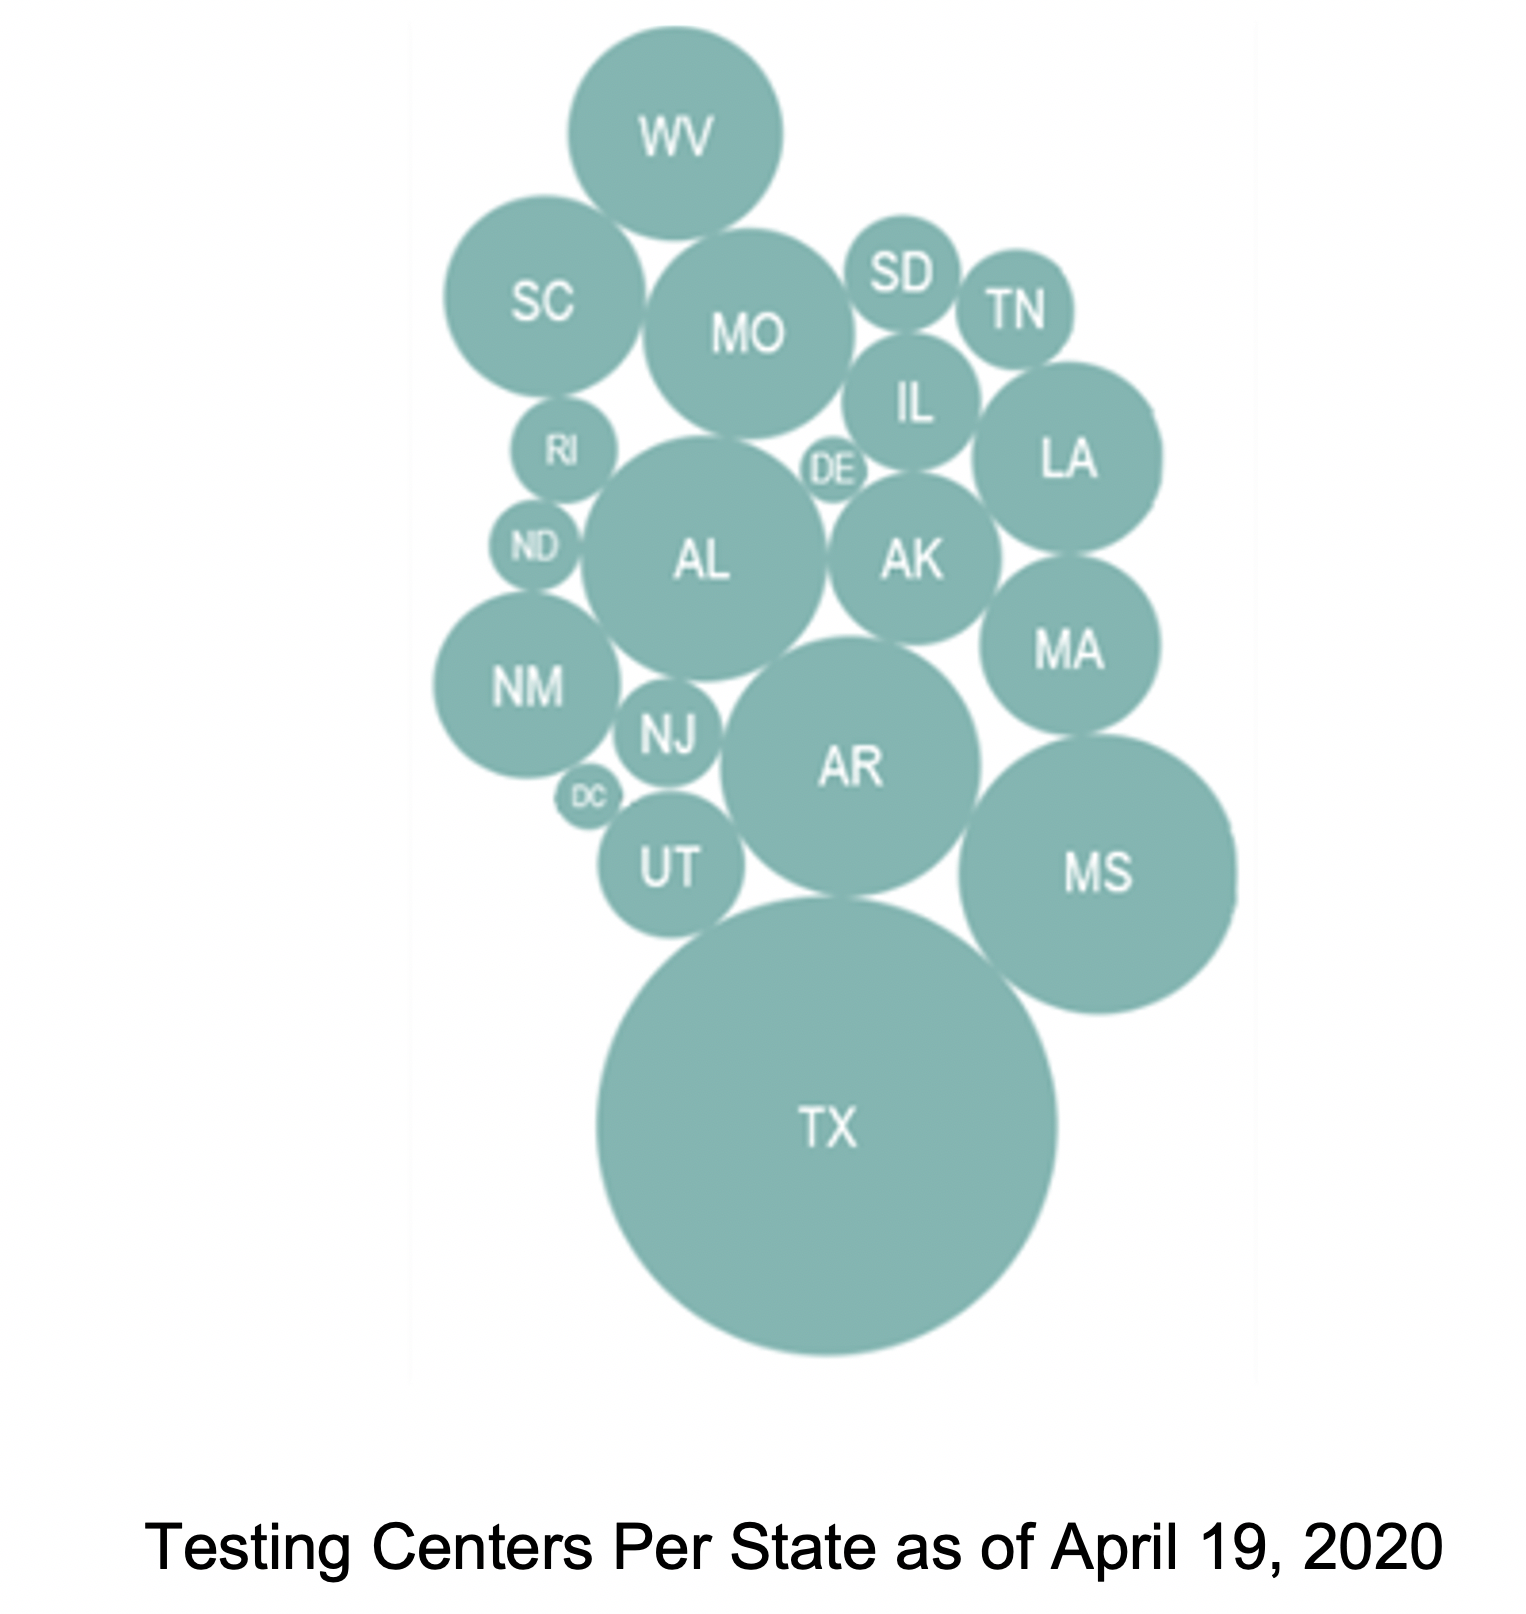 COVID-19, Testing at the County Level as of 19th April 2020 in the USA.